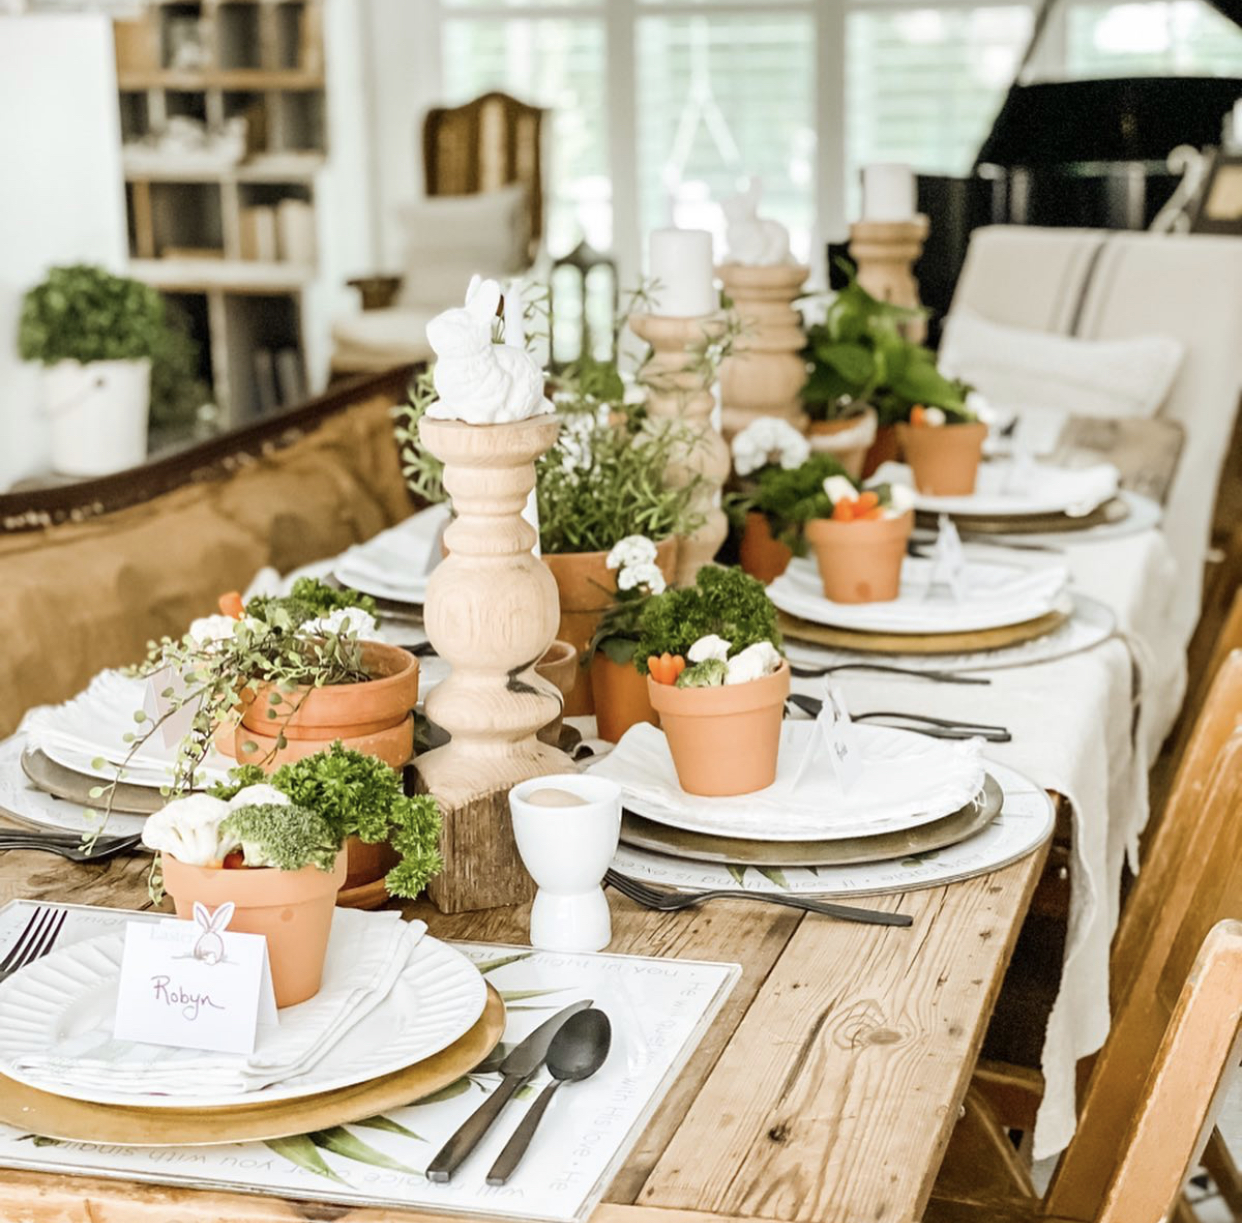 4 Ideas for Your Easter Tablescape